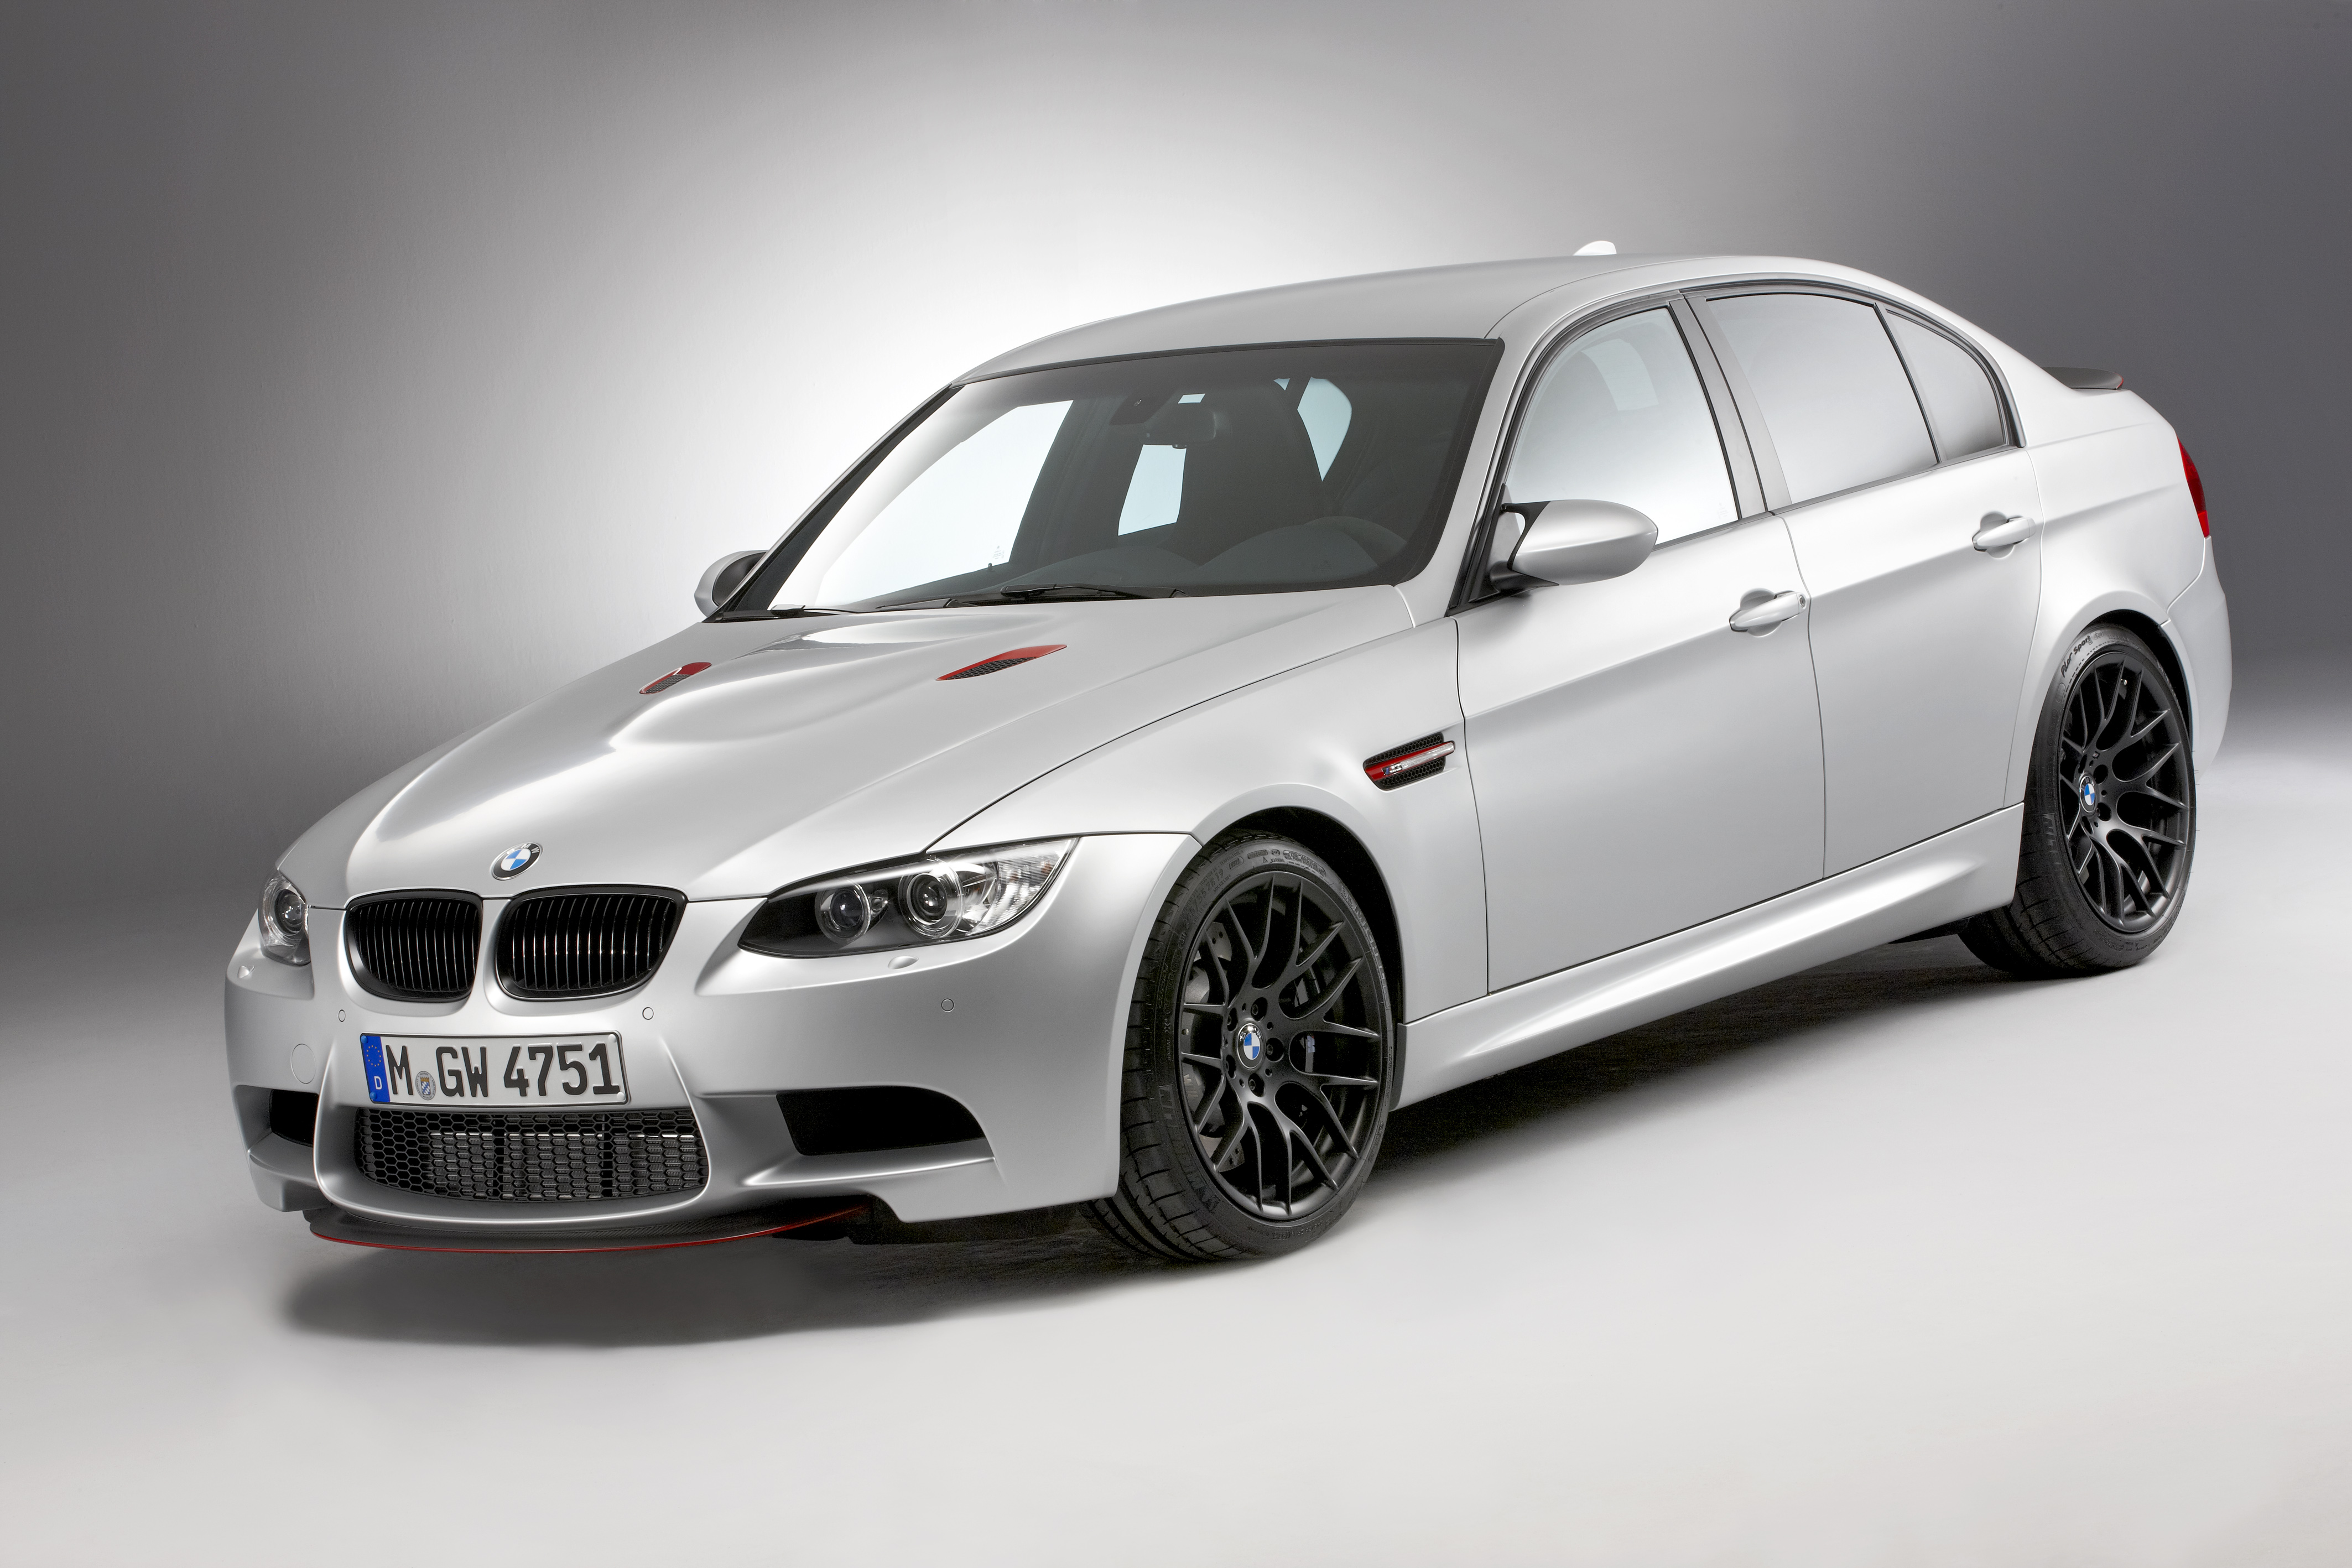 Bmw m3 power to weight ratio #2